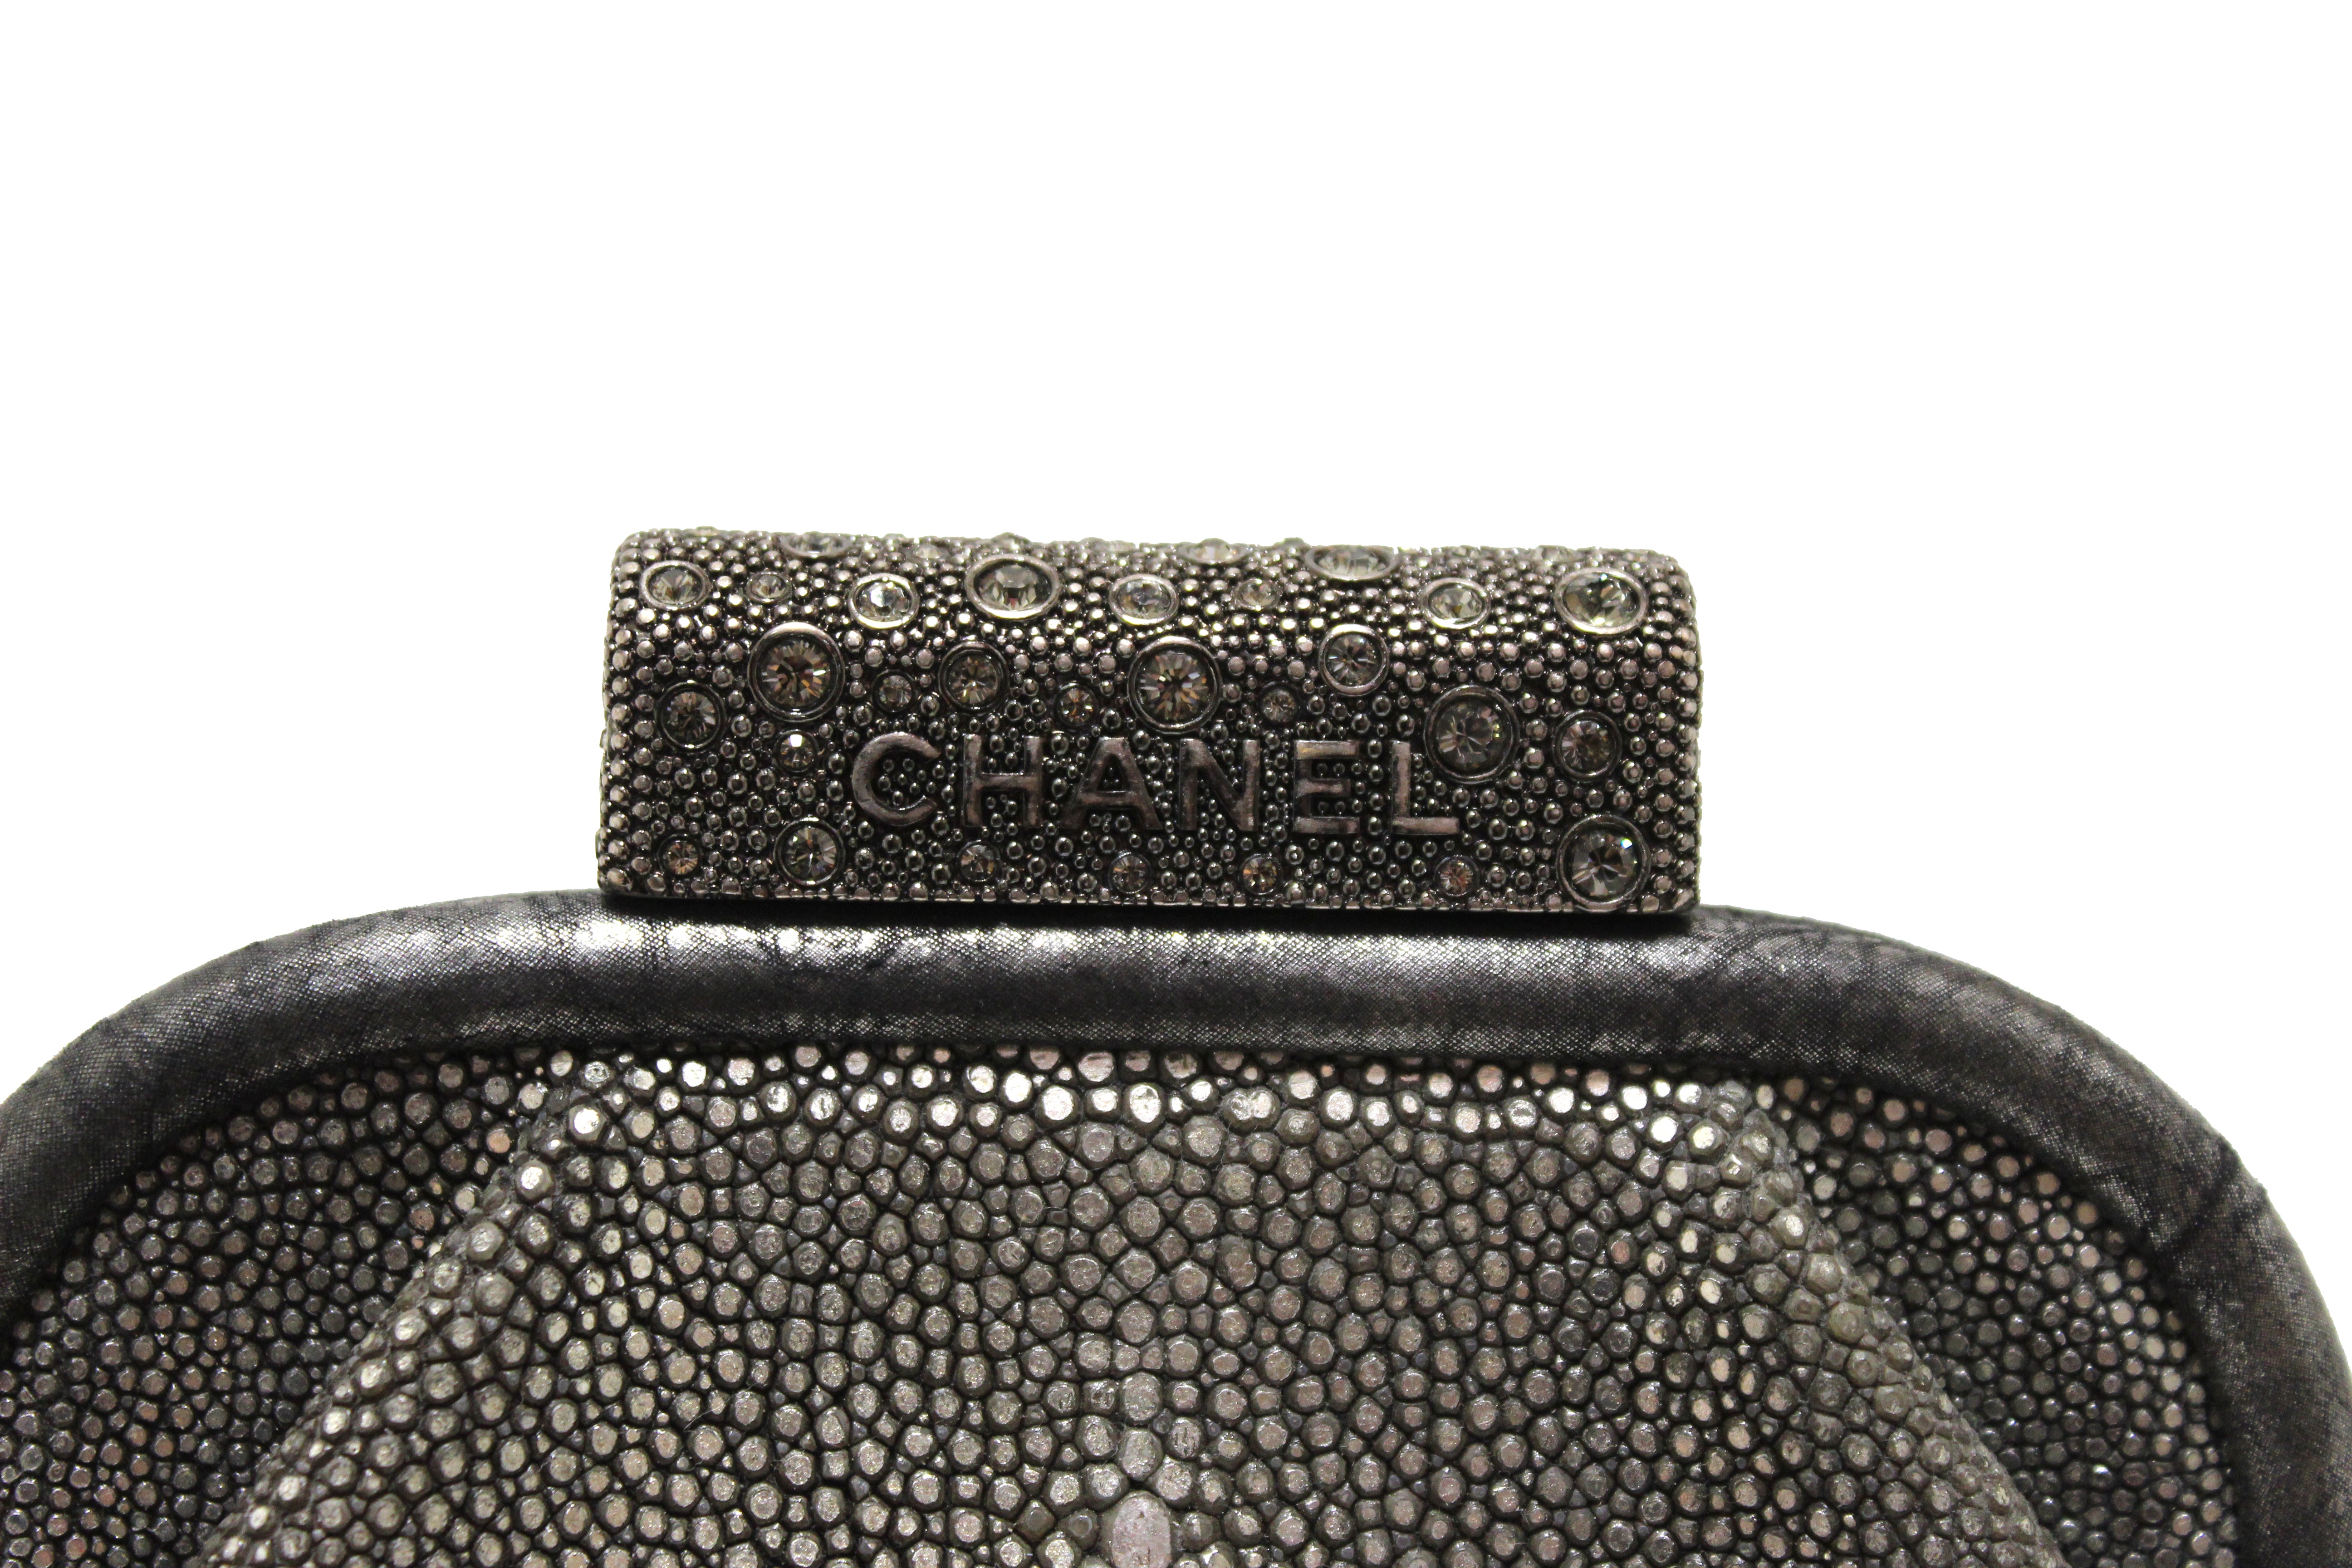 Authentic Chanel Stingray Crystal Degrade Frame Evening Clutch Bag